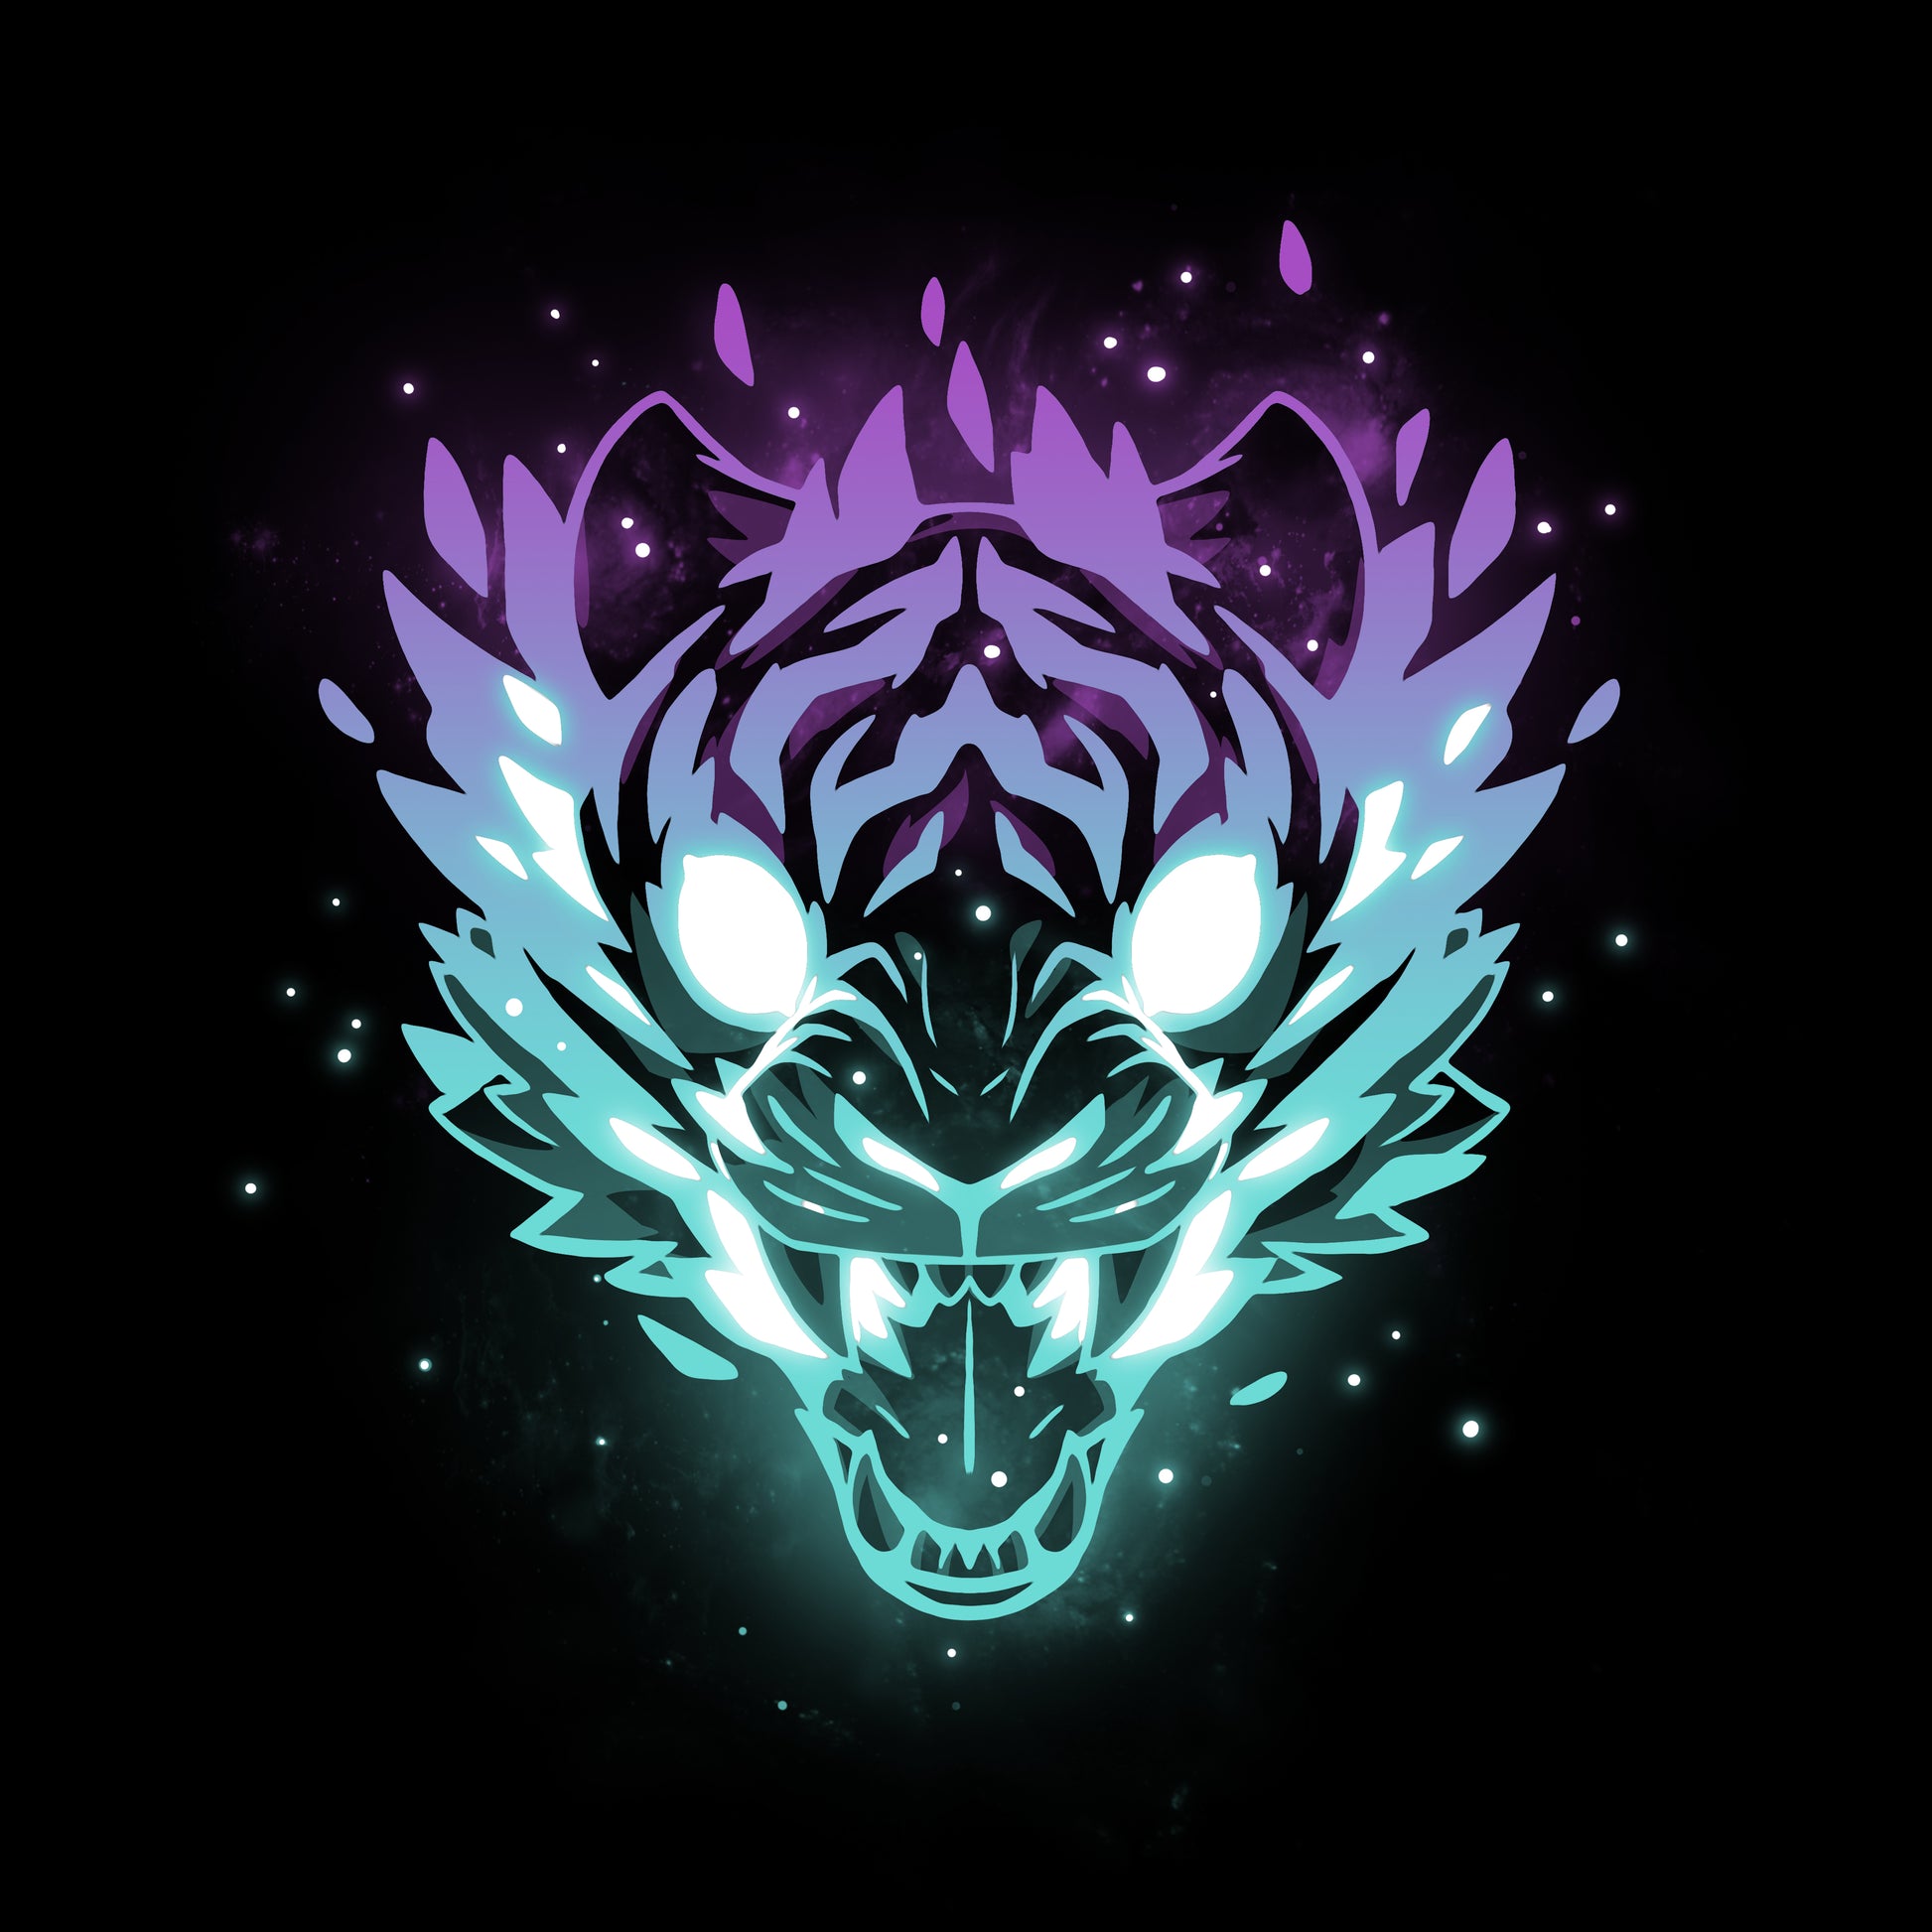 An Astral Roar T-shirt by TeeTurtle featuring an image of a tiger with glowing eyes.